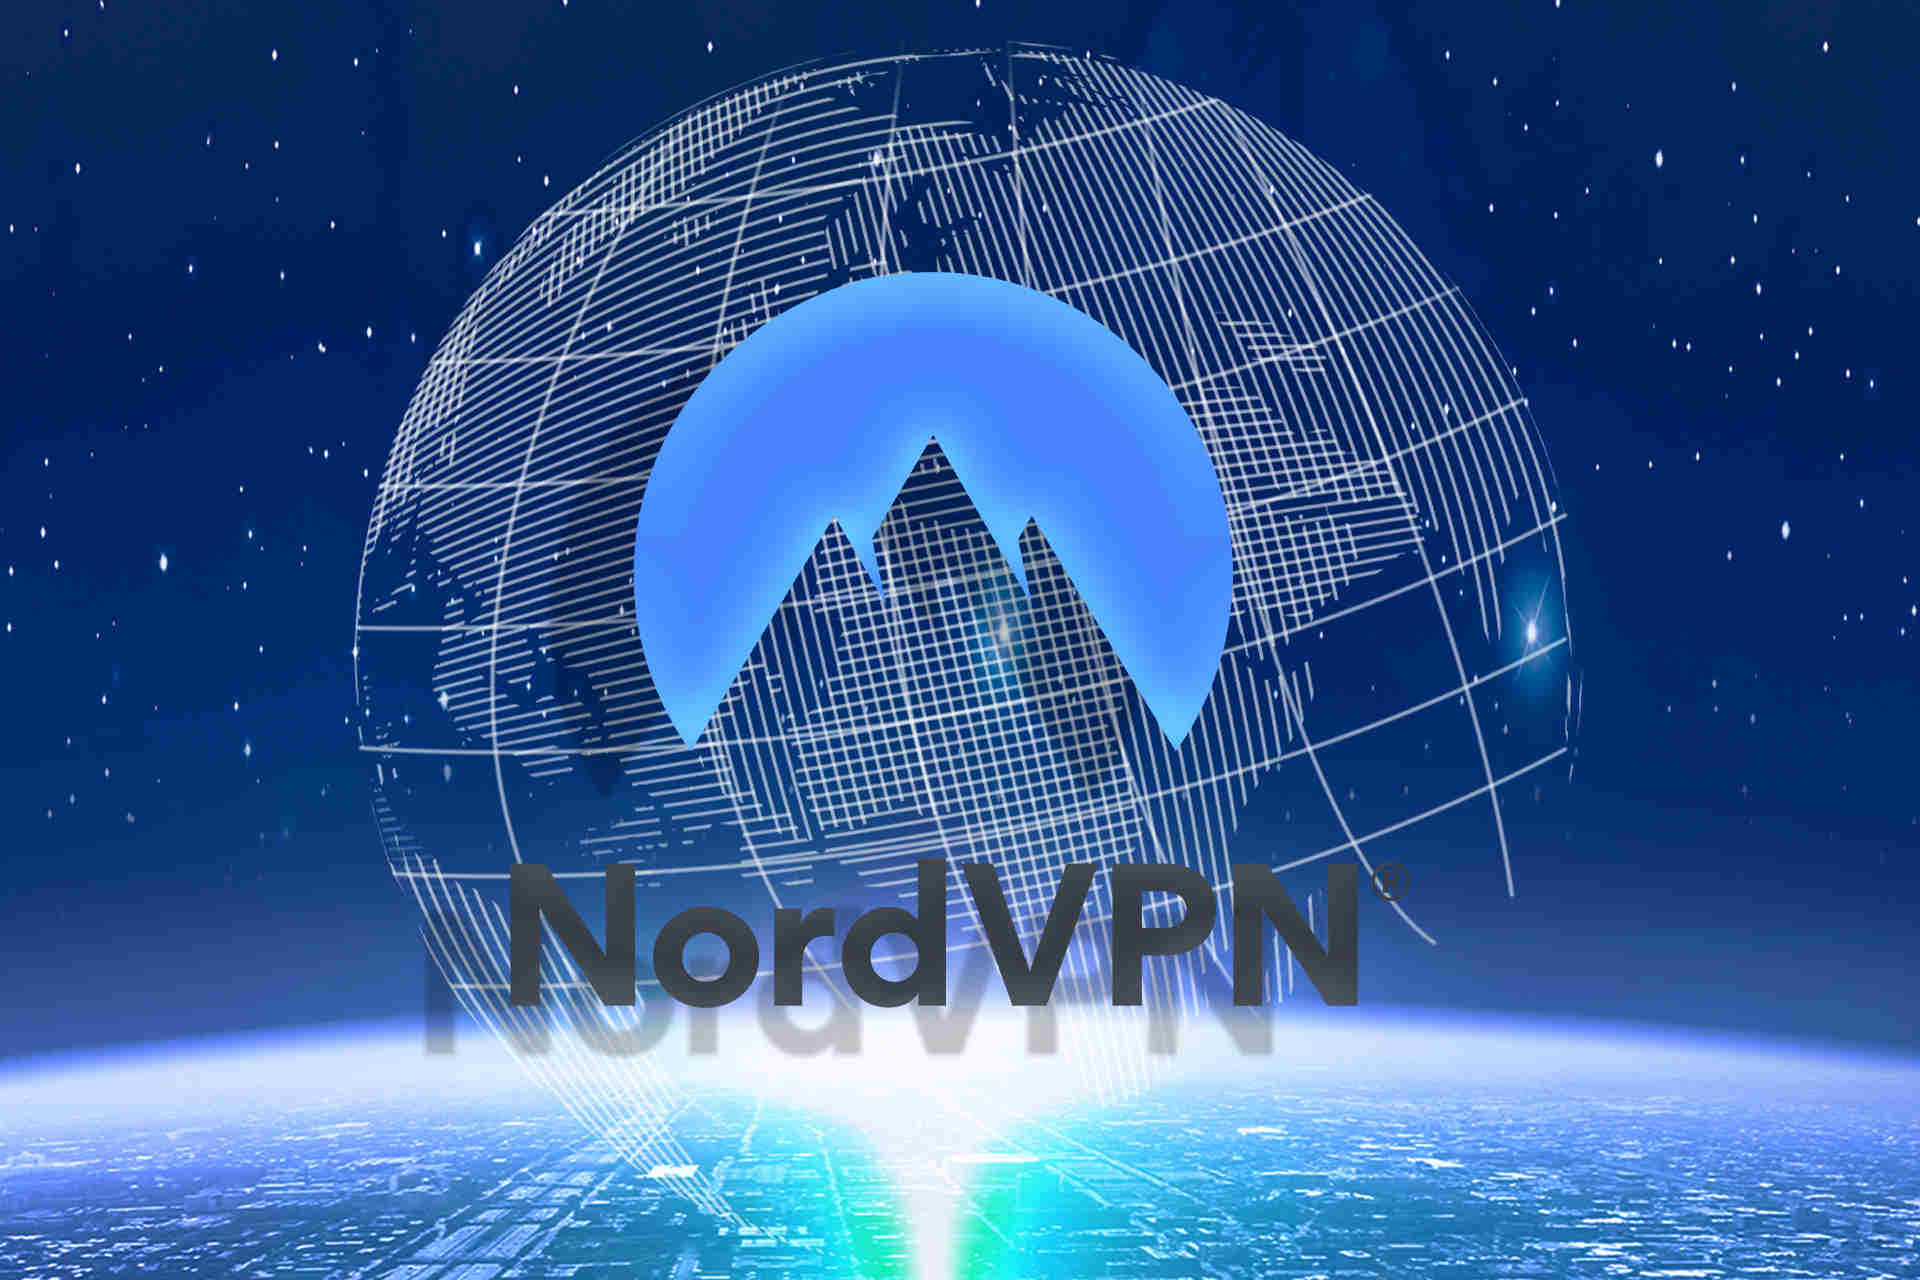 Find all about NordVPN